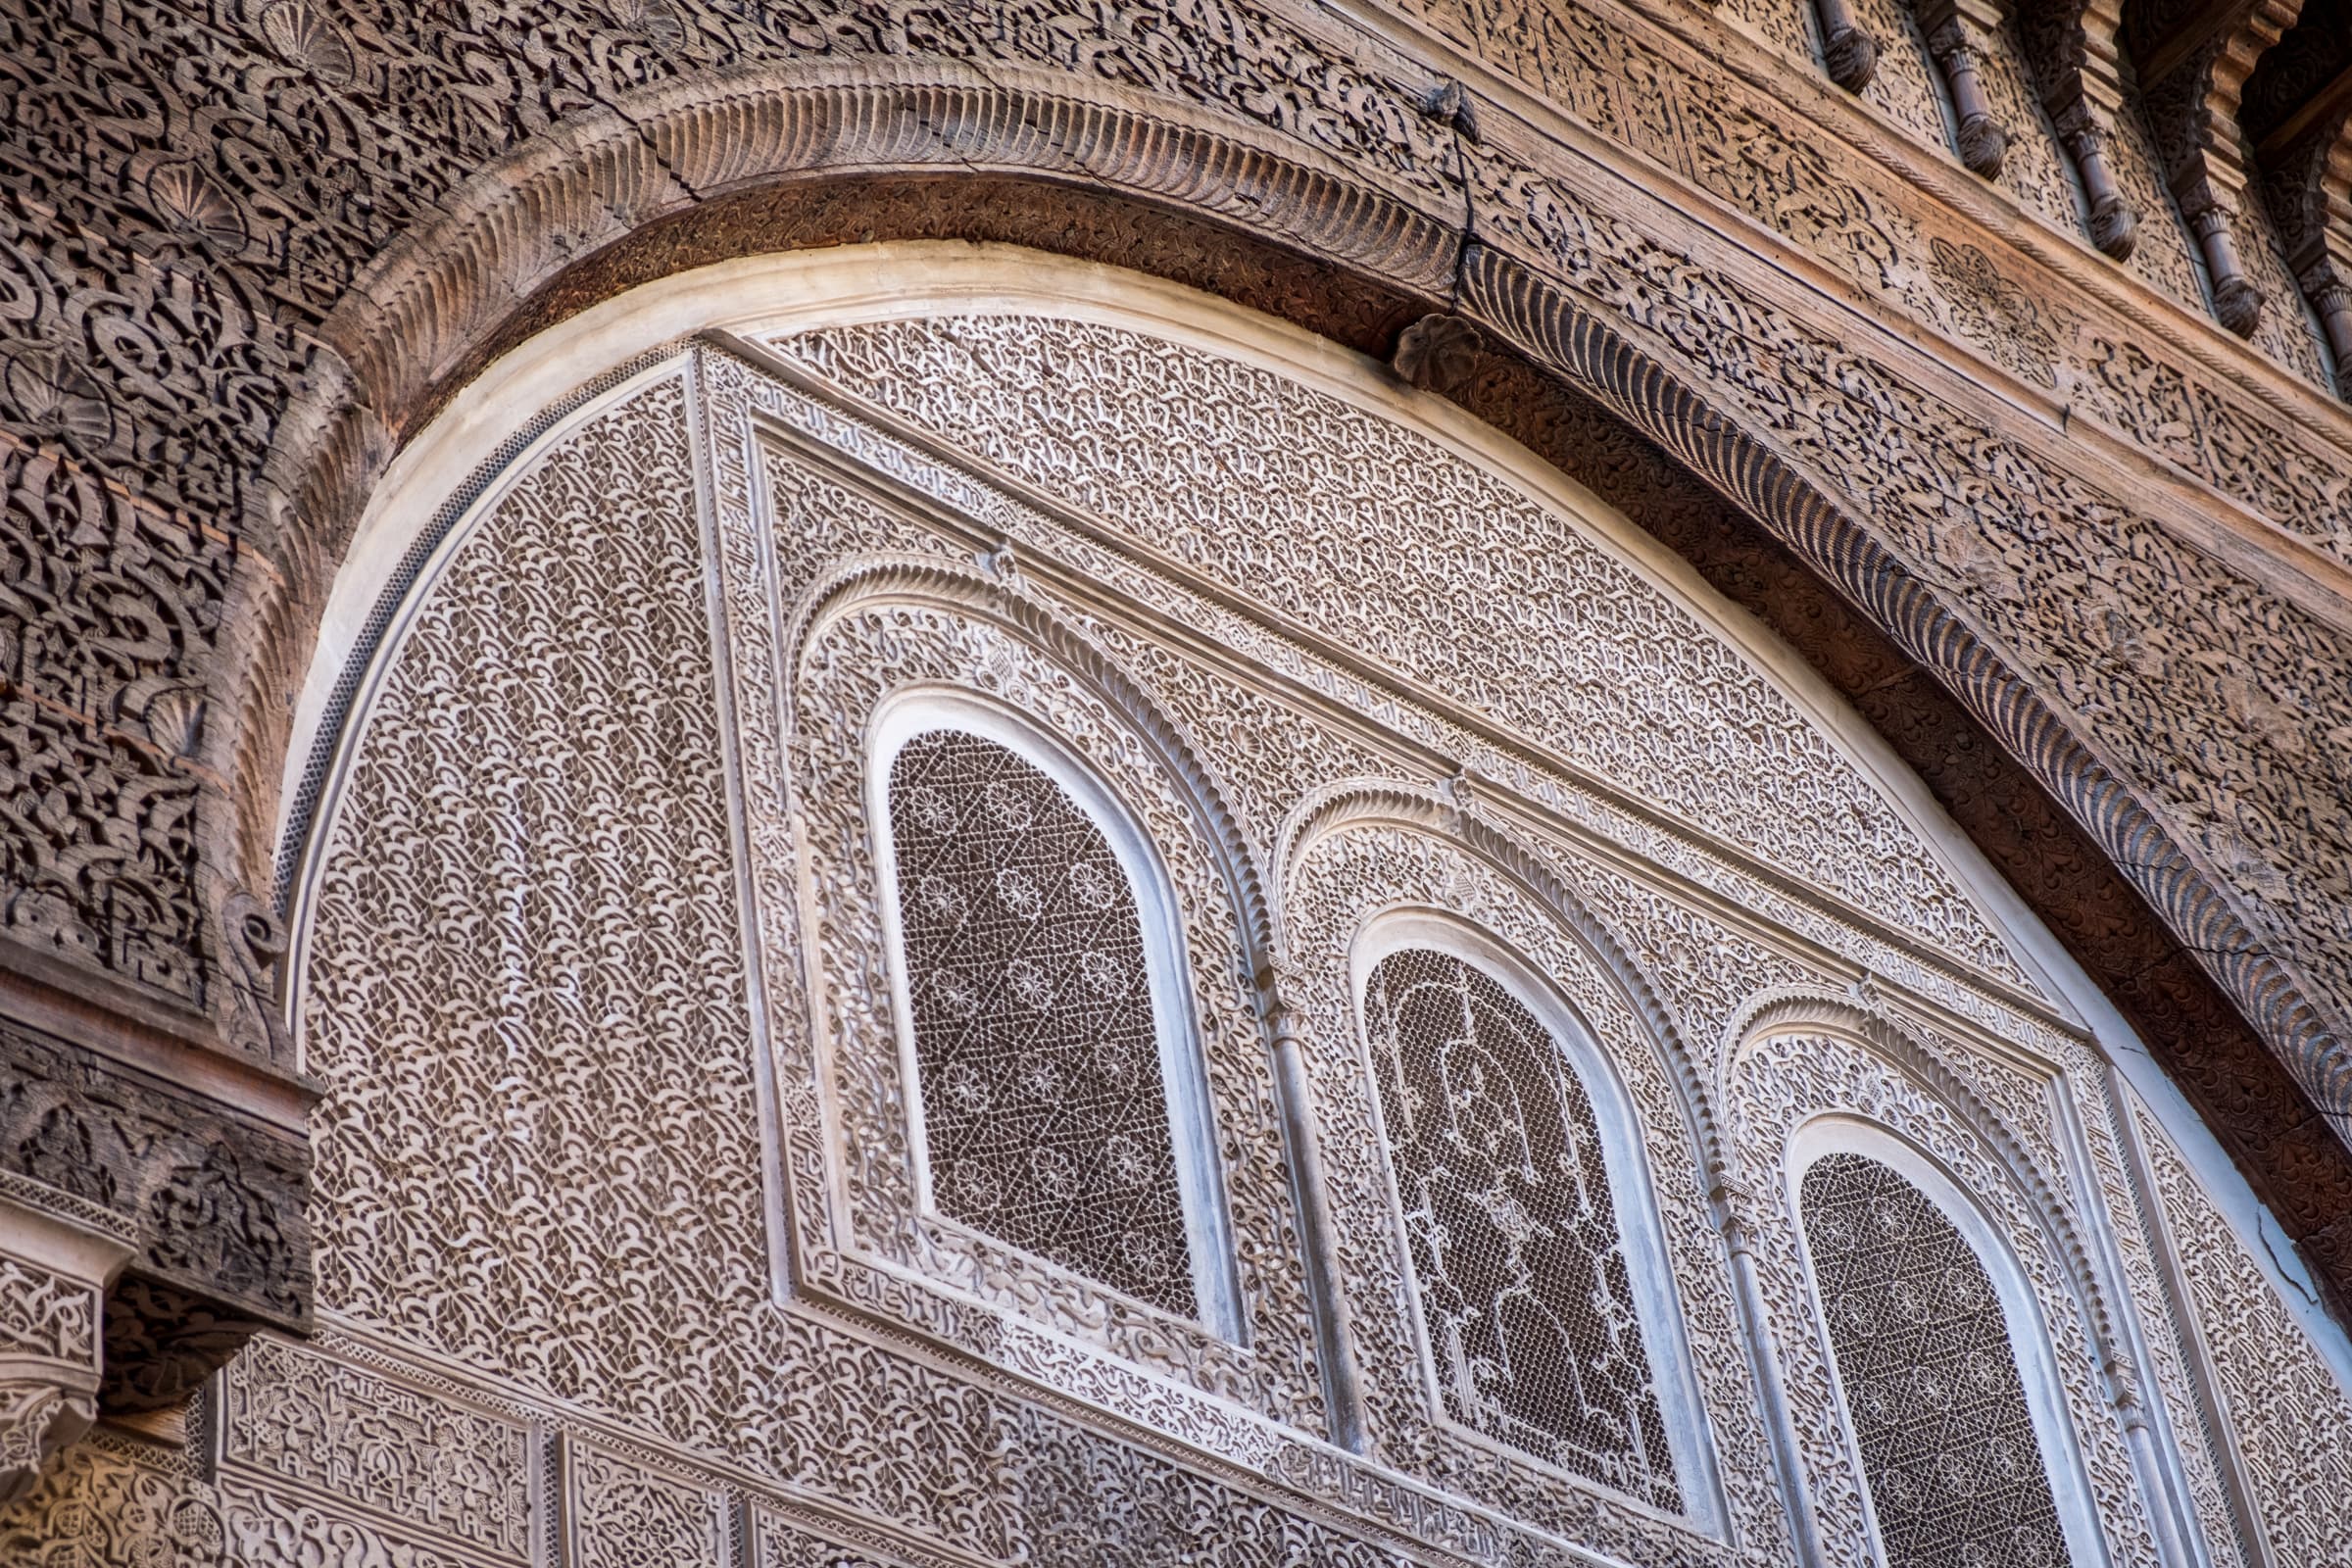 An intricately decorated wall in University of al-Qarawiyyin, Fez